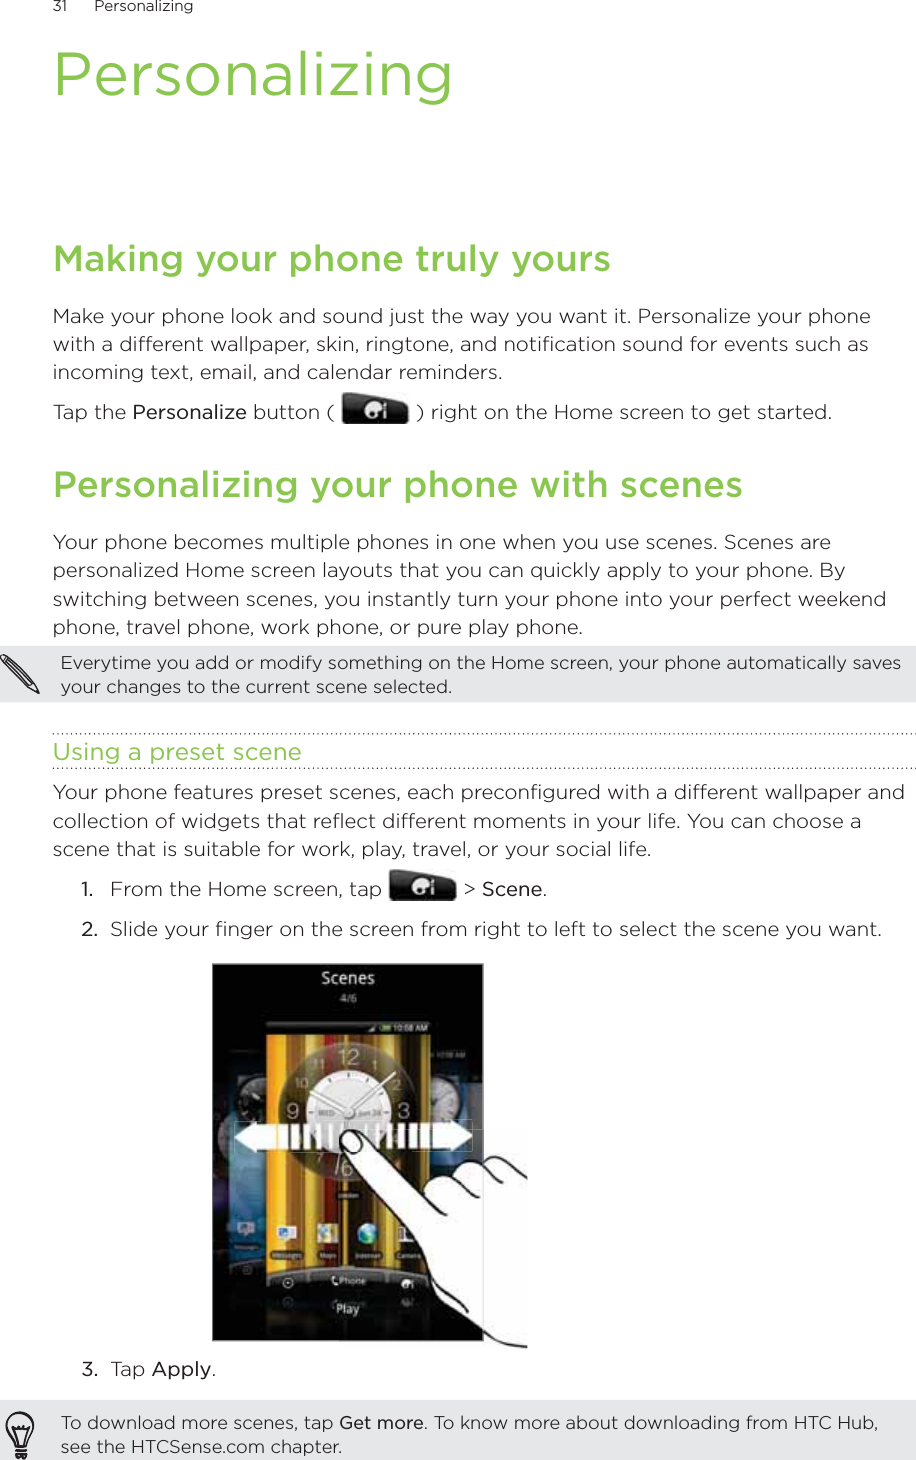 31      Personalizing      PersonalizingMaking your phone truly yoursMake your phone look and sound just the way you want it. Personalize your phone with a different wallpaper, skin, ringtone, and notification sound for events such as incoming text, email, and calendar reminders.Tap the Personalize button (   ) right on the Home screen to get started.Personalizing your phone with scenesYour phone becomes multiple phones in one when you use scenes. Scenes are personalized Home screen layouts that you can quickly apply to your phone. By switching between scenes, you instantly turn your phone into your perfect weekend phone, travel phone, work phone, or pure play phone.Everytime you add or modify something on the Home screen, your phone automatically saves your changes to the current scene selected.Using a preset sceneYour phone features preset scenes, each preconfigured with a different wallpaper and collection of widgets that reflect different moments in your life. You can choose a scene that is suitable for work, play, travel, or your social life.From the Home screen, tap   &gt; Scene.Slide your finger on the screen from right to left to select the scene you want.3.  Tap Apply.To download more scenes, tap Get more. To know more about downloading from HTC Hub, see the HTCSense.com chapter.1.2.